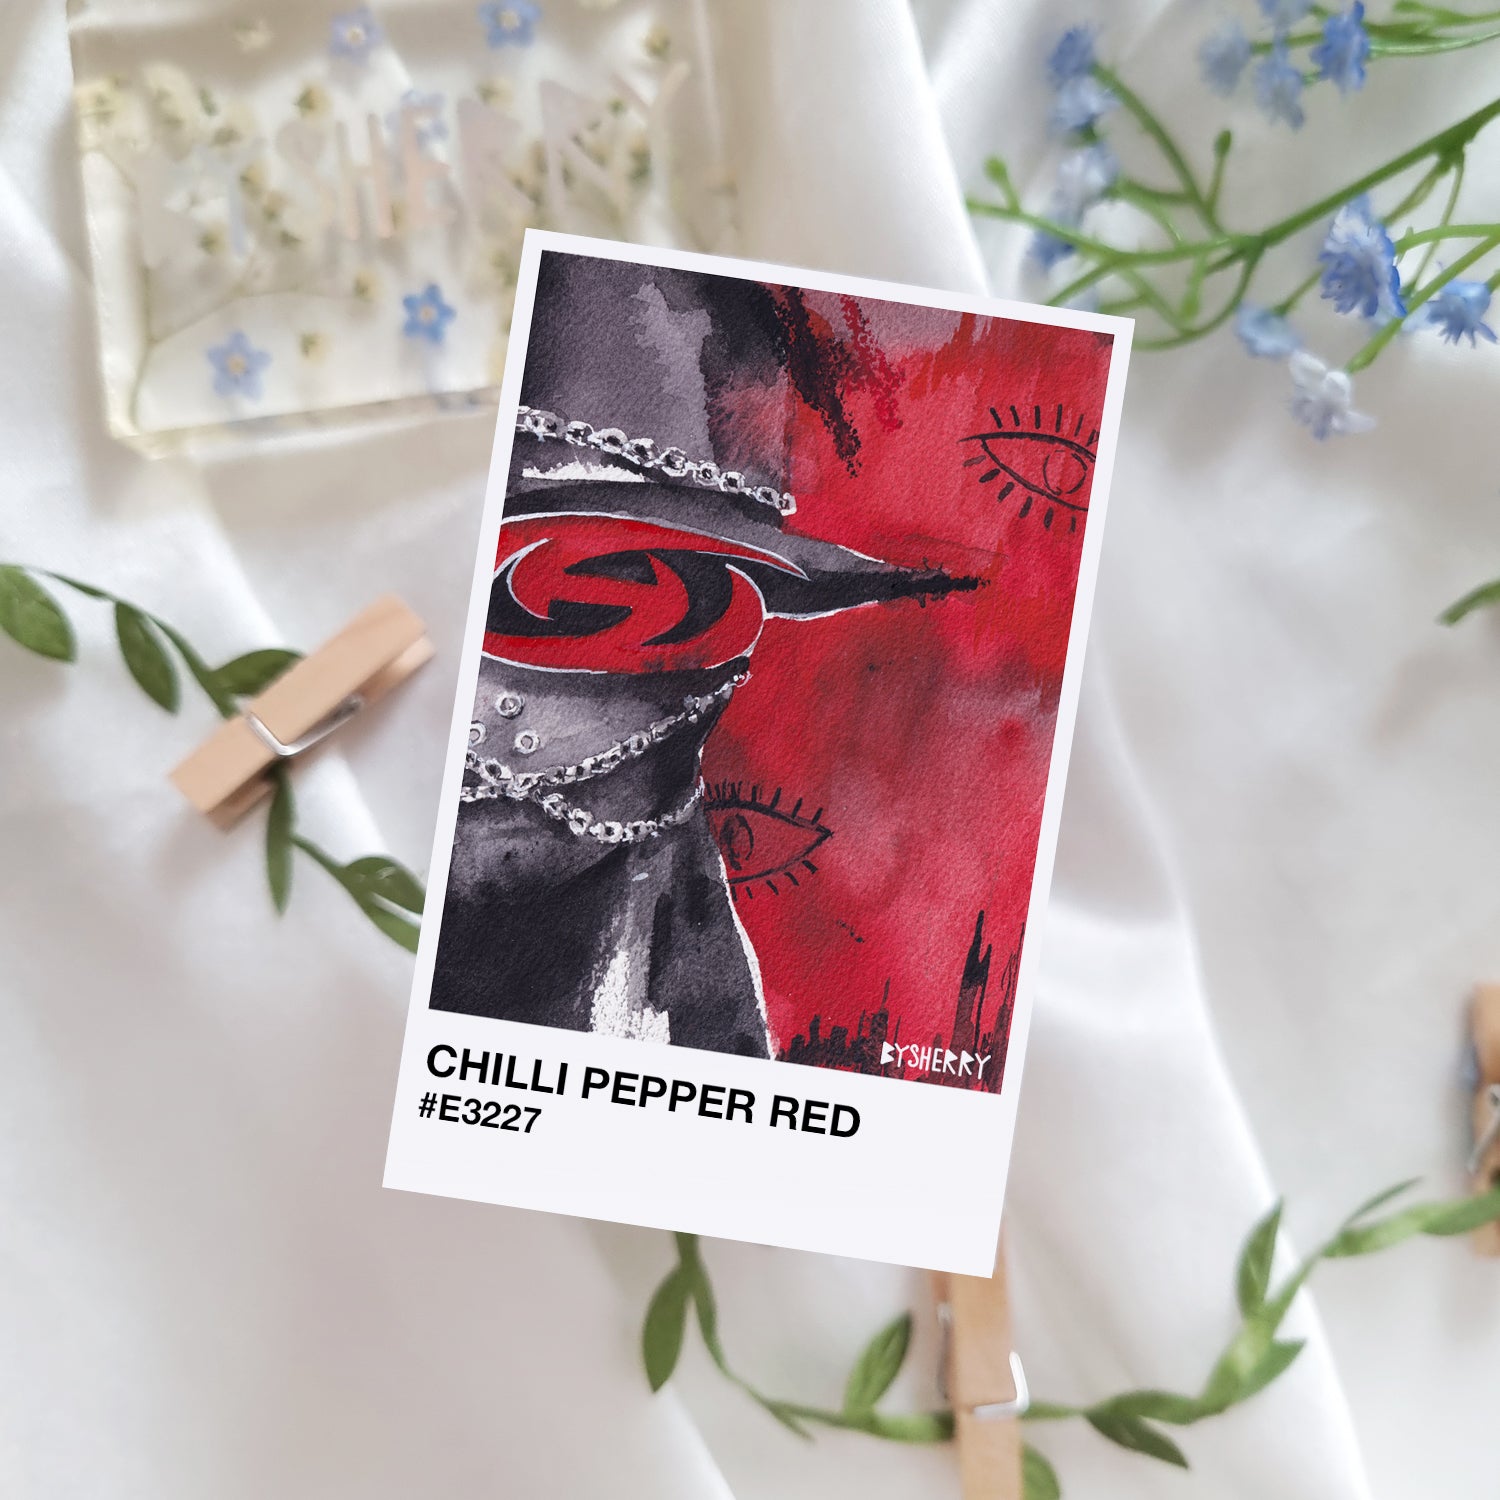 ATEEZ "RED" Aesthetic Photocard-Style Art Prints - Set of 3